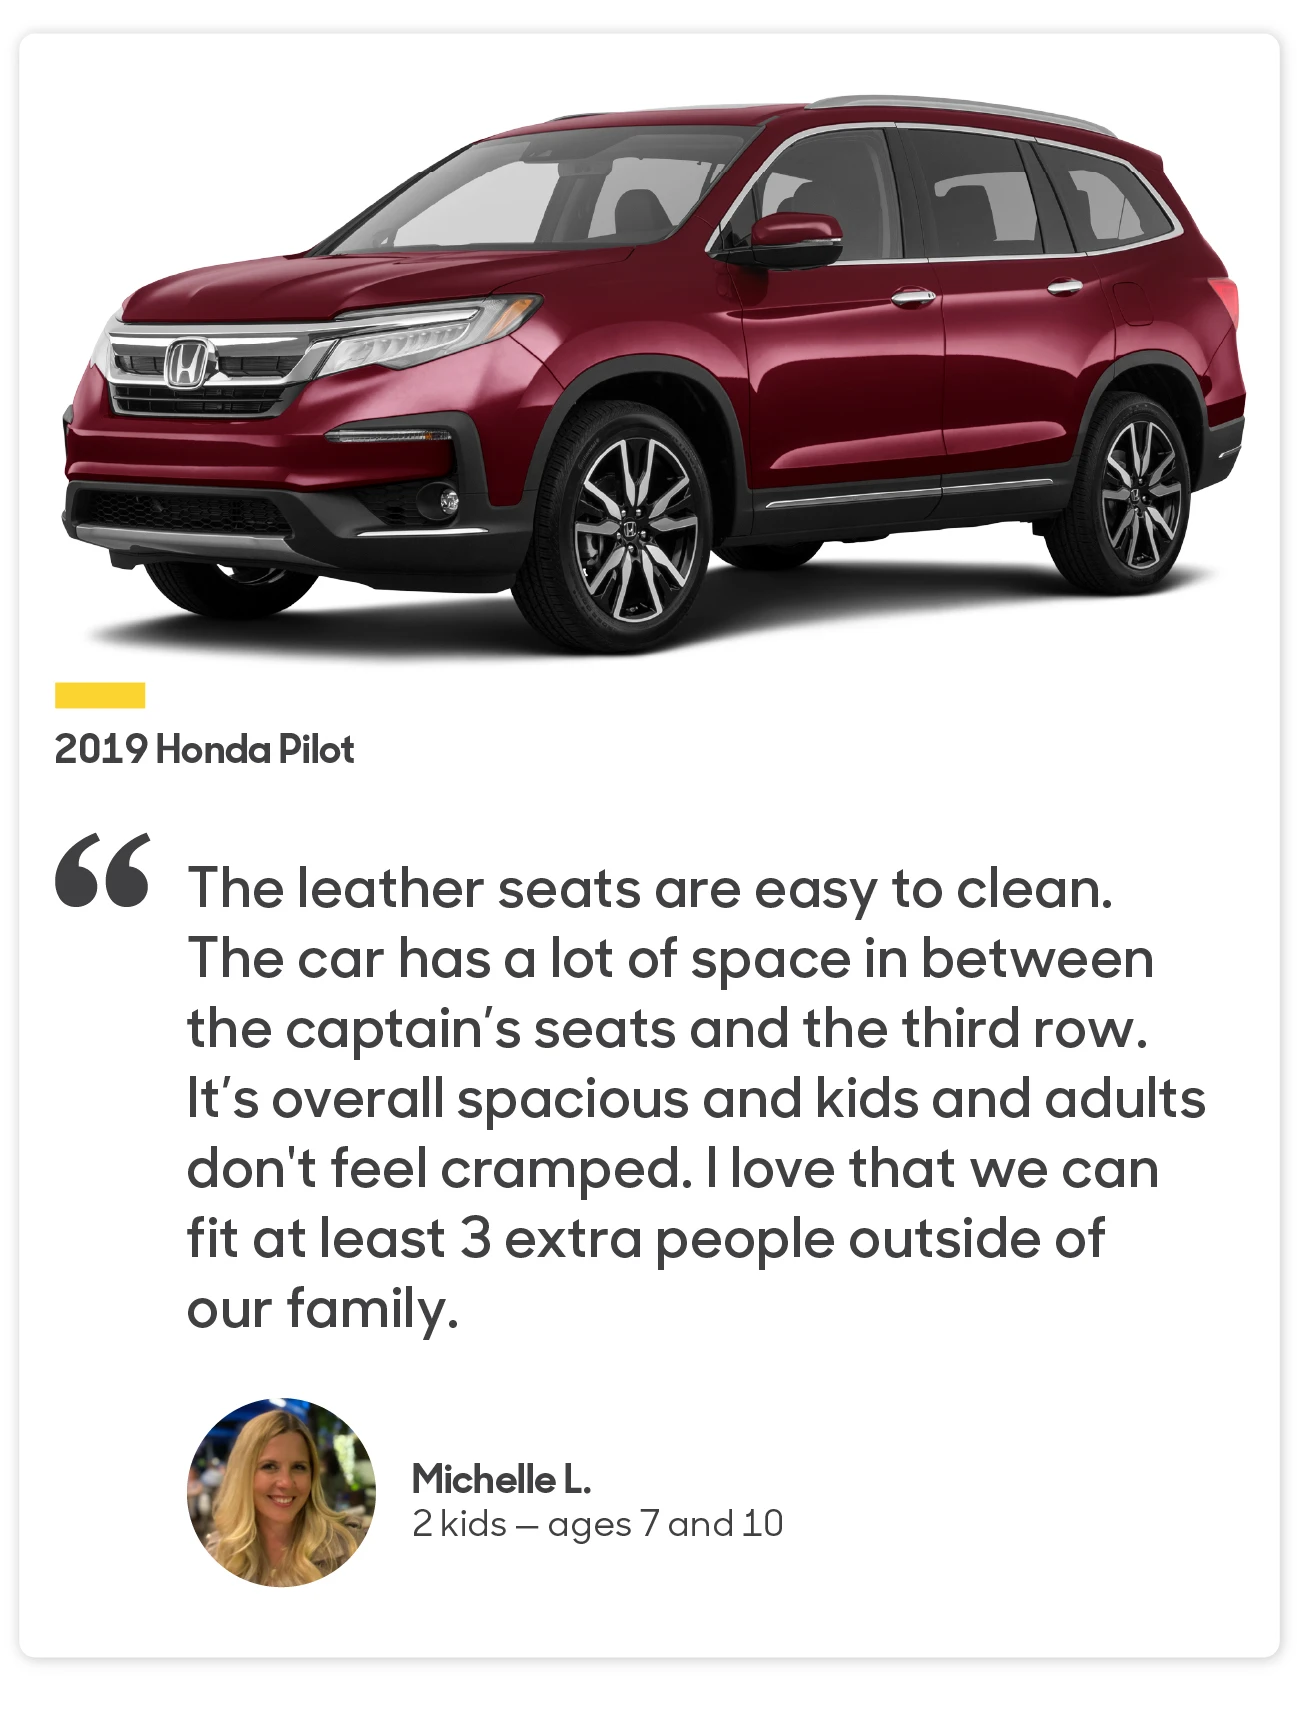 Michelle 2 children — ages 7 and 10 2019 Honda Pilot
“The leather seats are easy to clean. The car has a lot of space in between the captain’s seats and the third row. It’s overall spacious and kids and adults don't feel cramped. I love that we can fit at least 3 extra people outside of our family."
